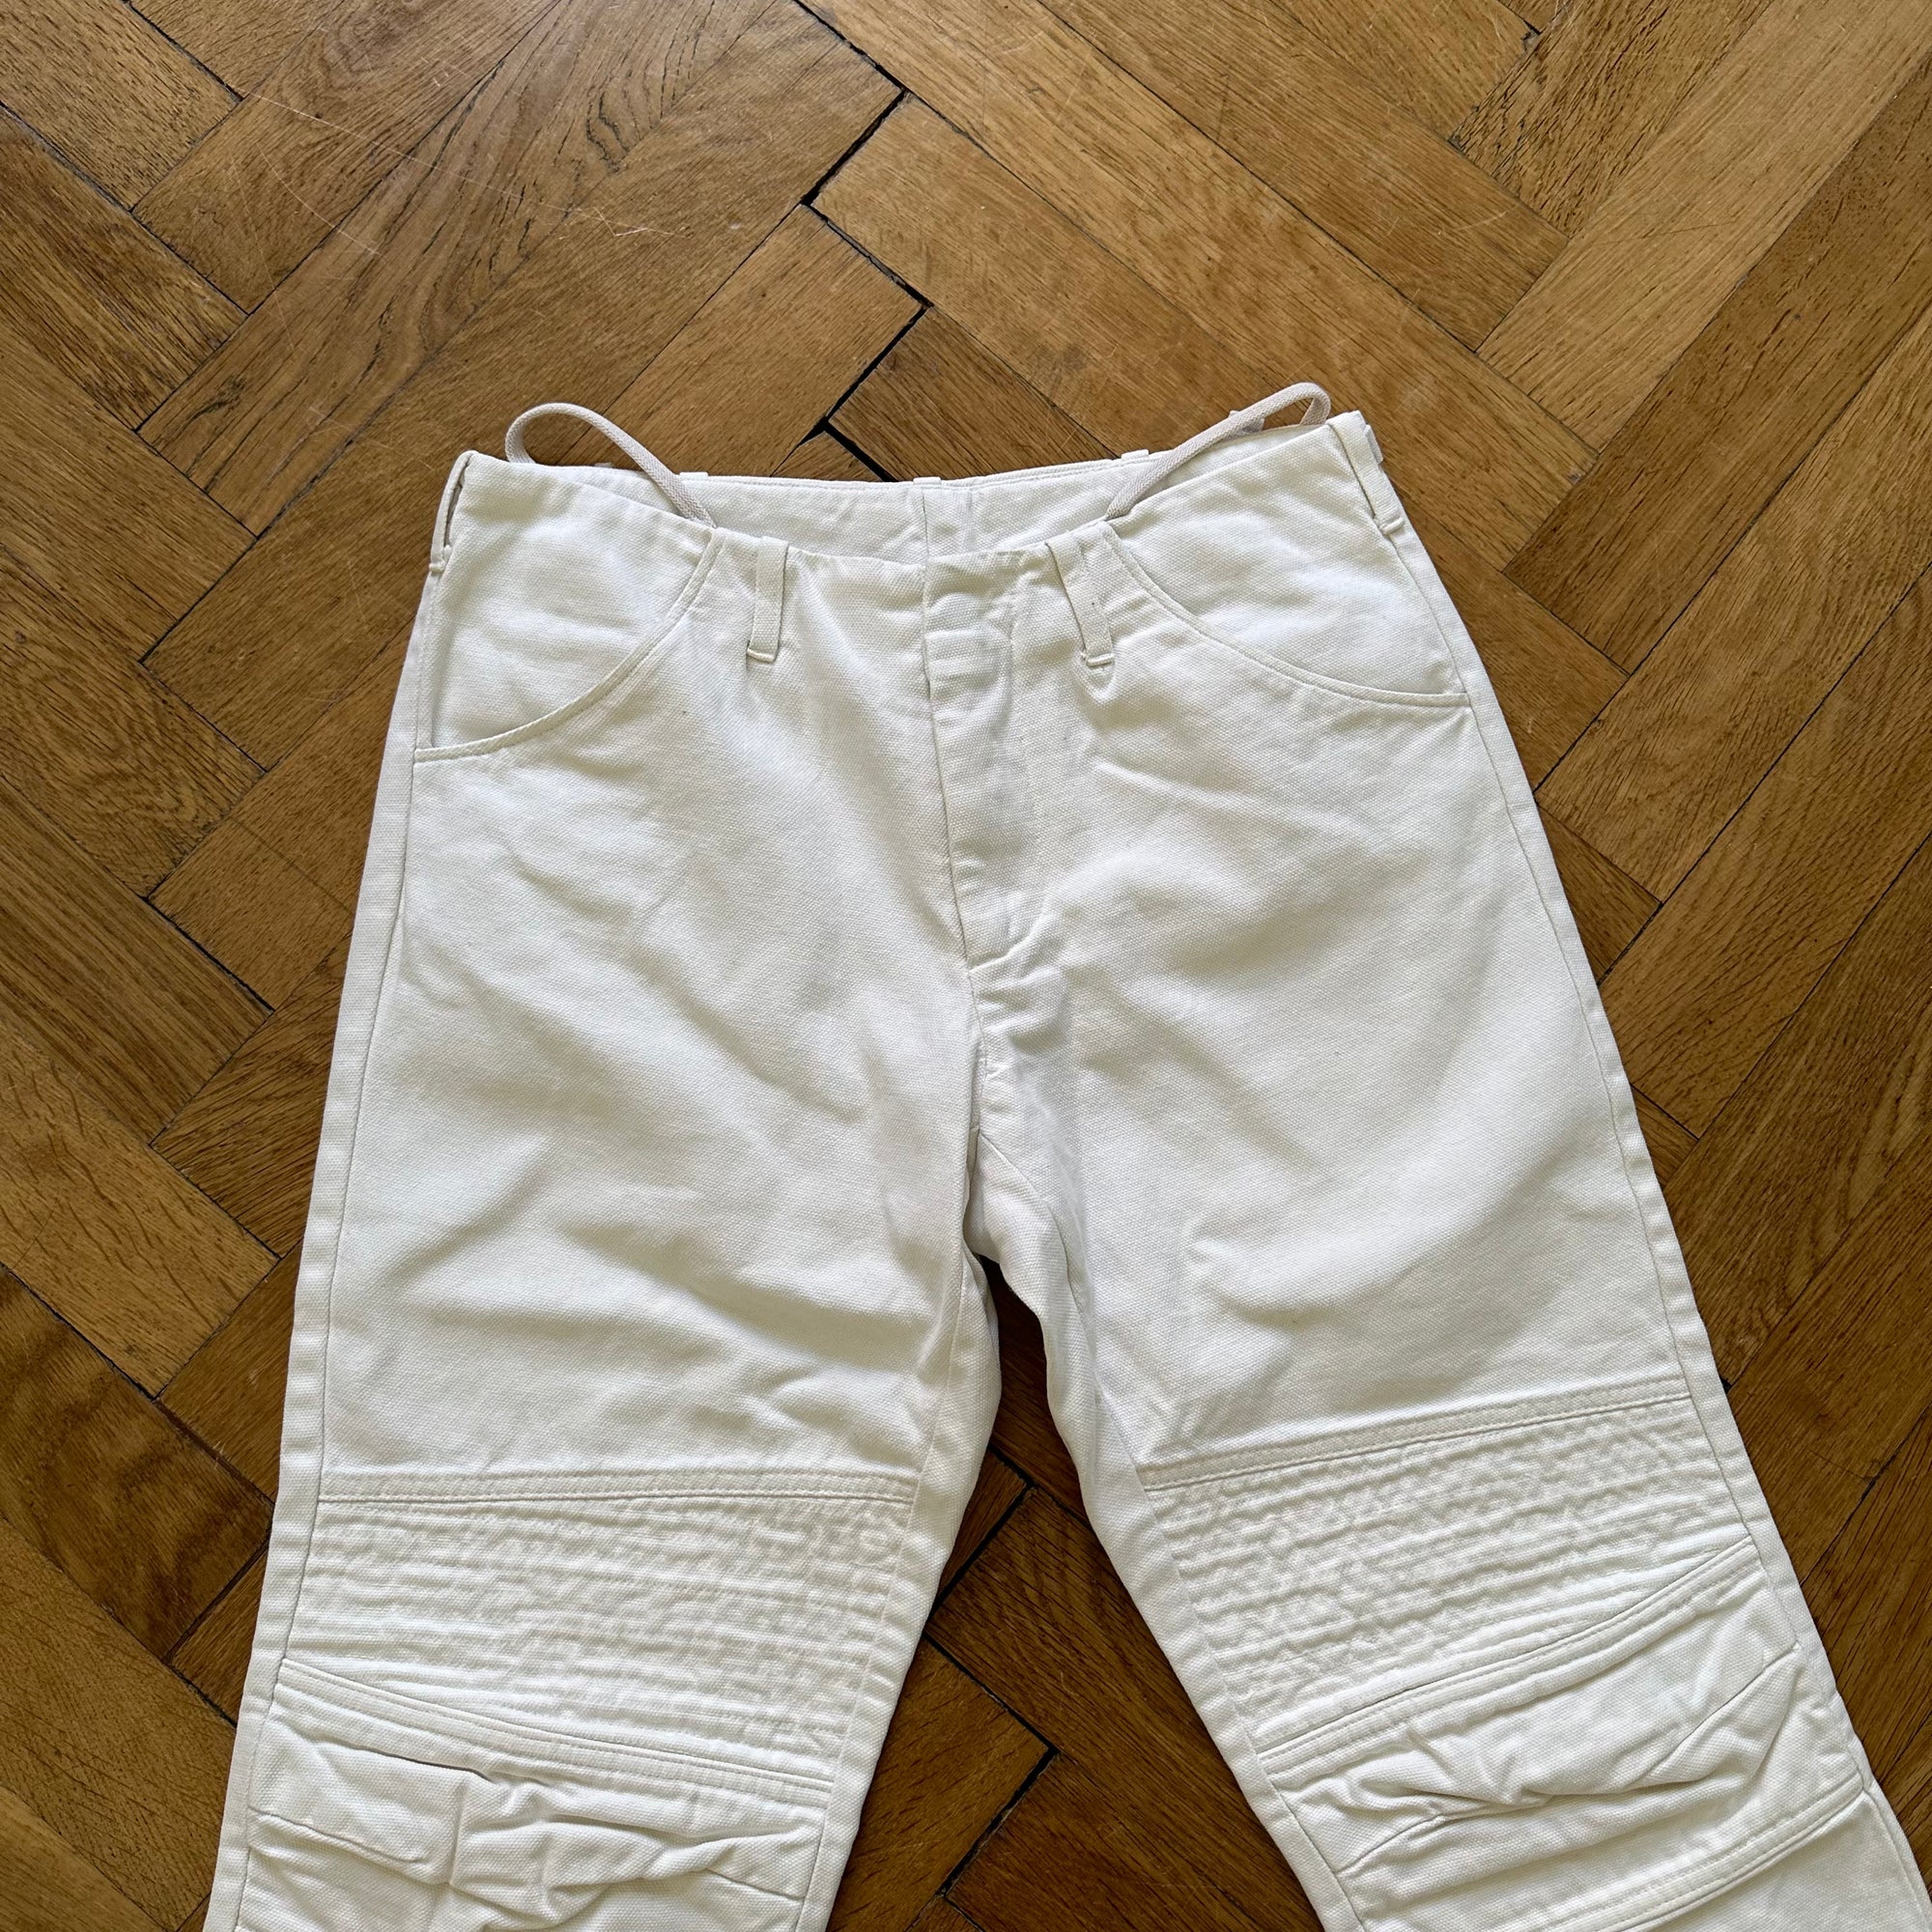 Helmut Lang AW99 Astro Pants